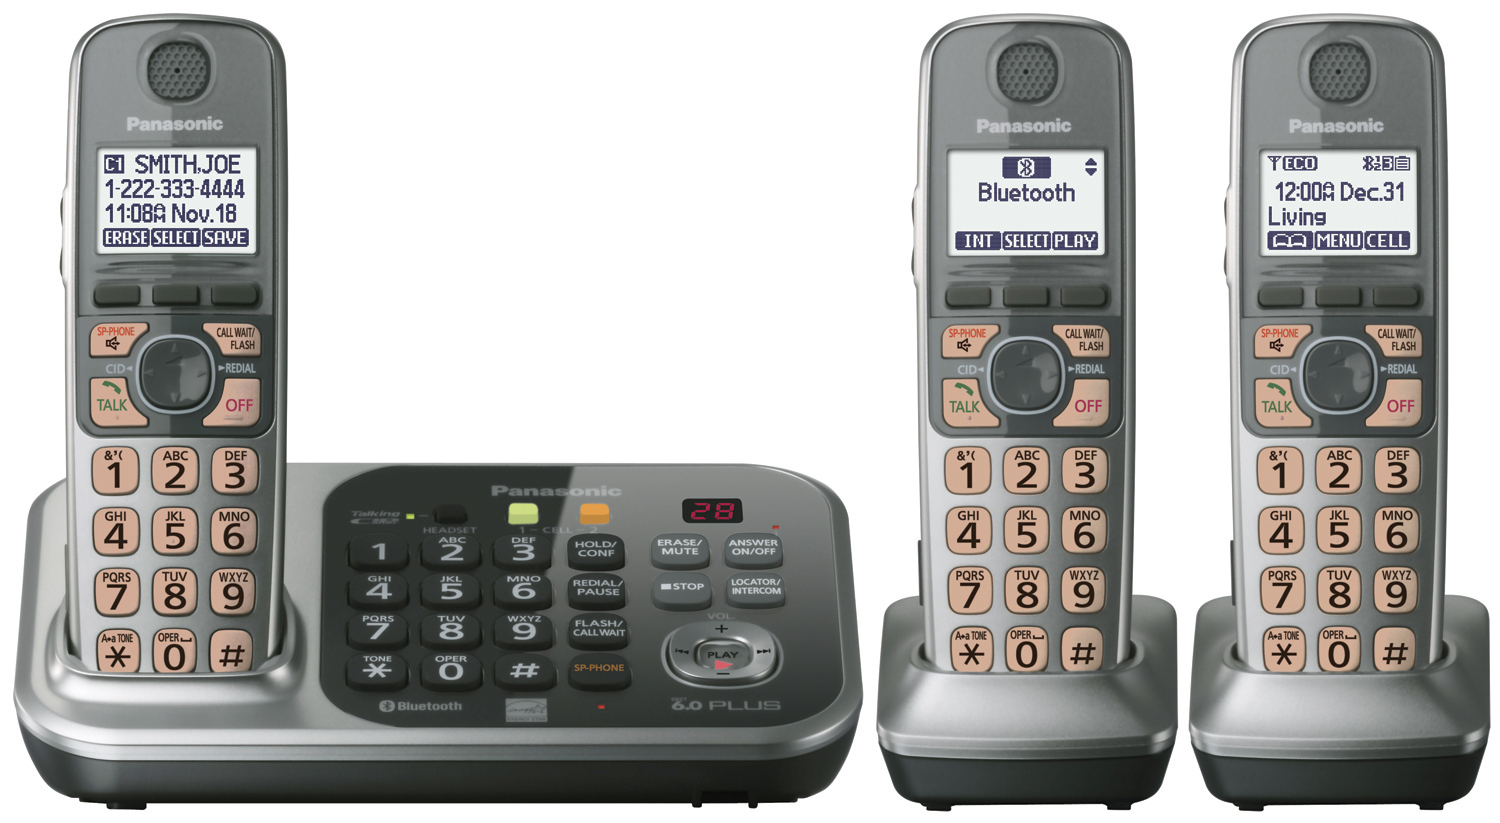 Panasonic KX-TG7743S DECT 6.0 1.90 GHz Cordless Phone, Silver - image 2 of 2